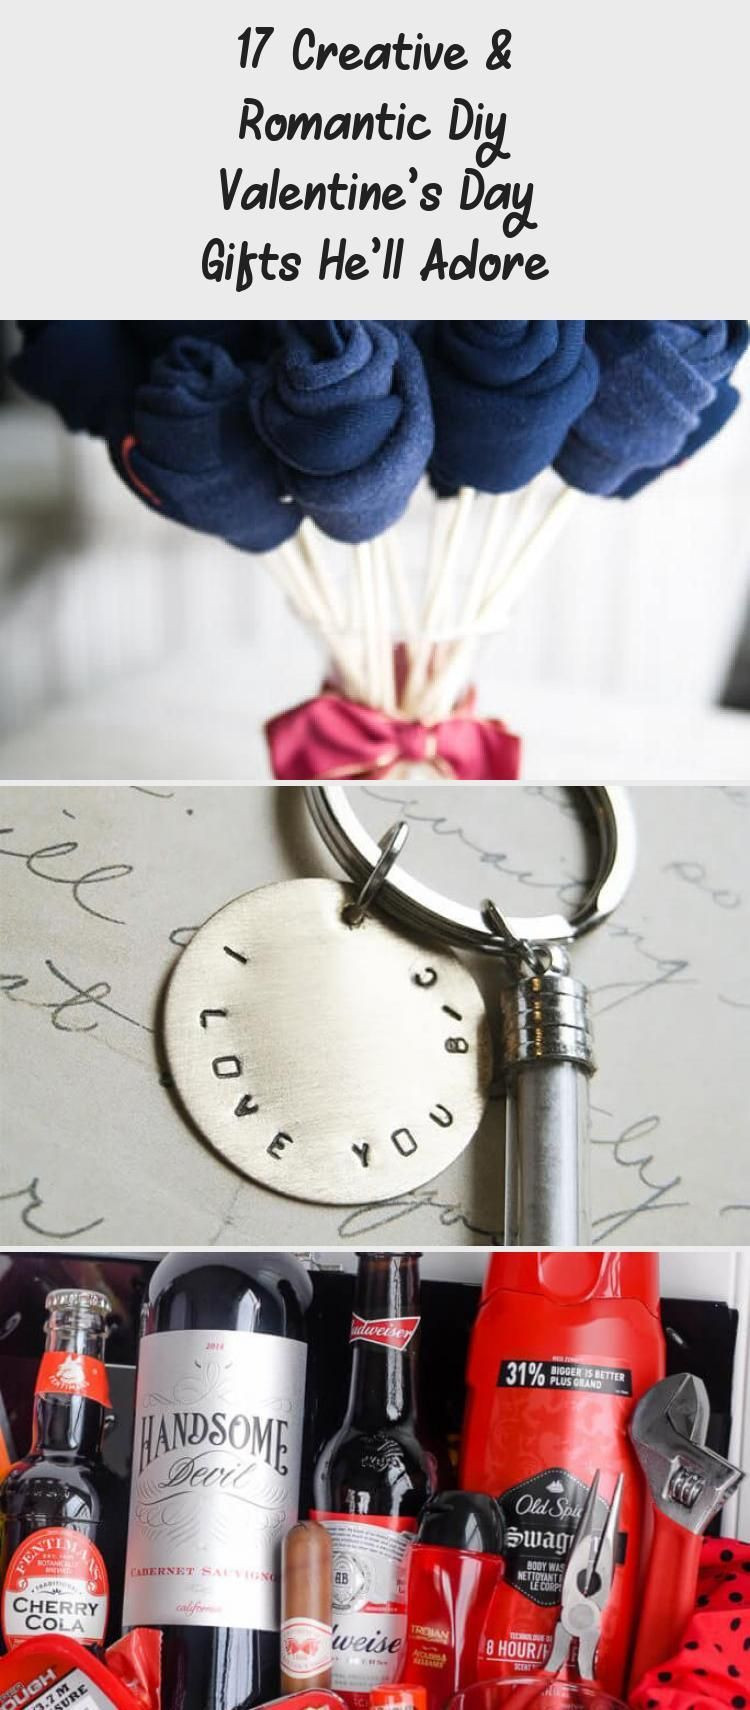 Creative Valentines Day Gifts For Boyfriends
 Creative Homemade Gifts For Boyfriend For Valentines Day